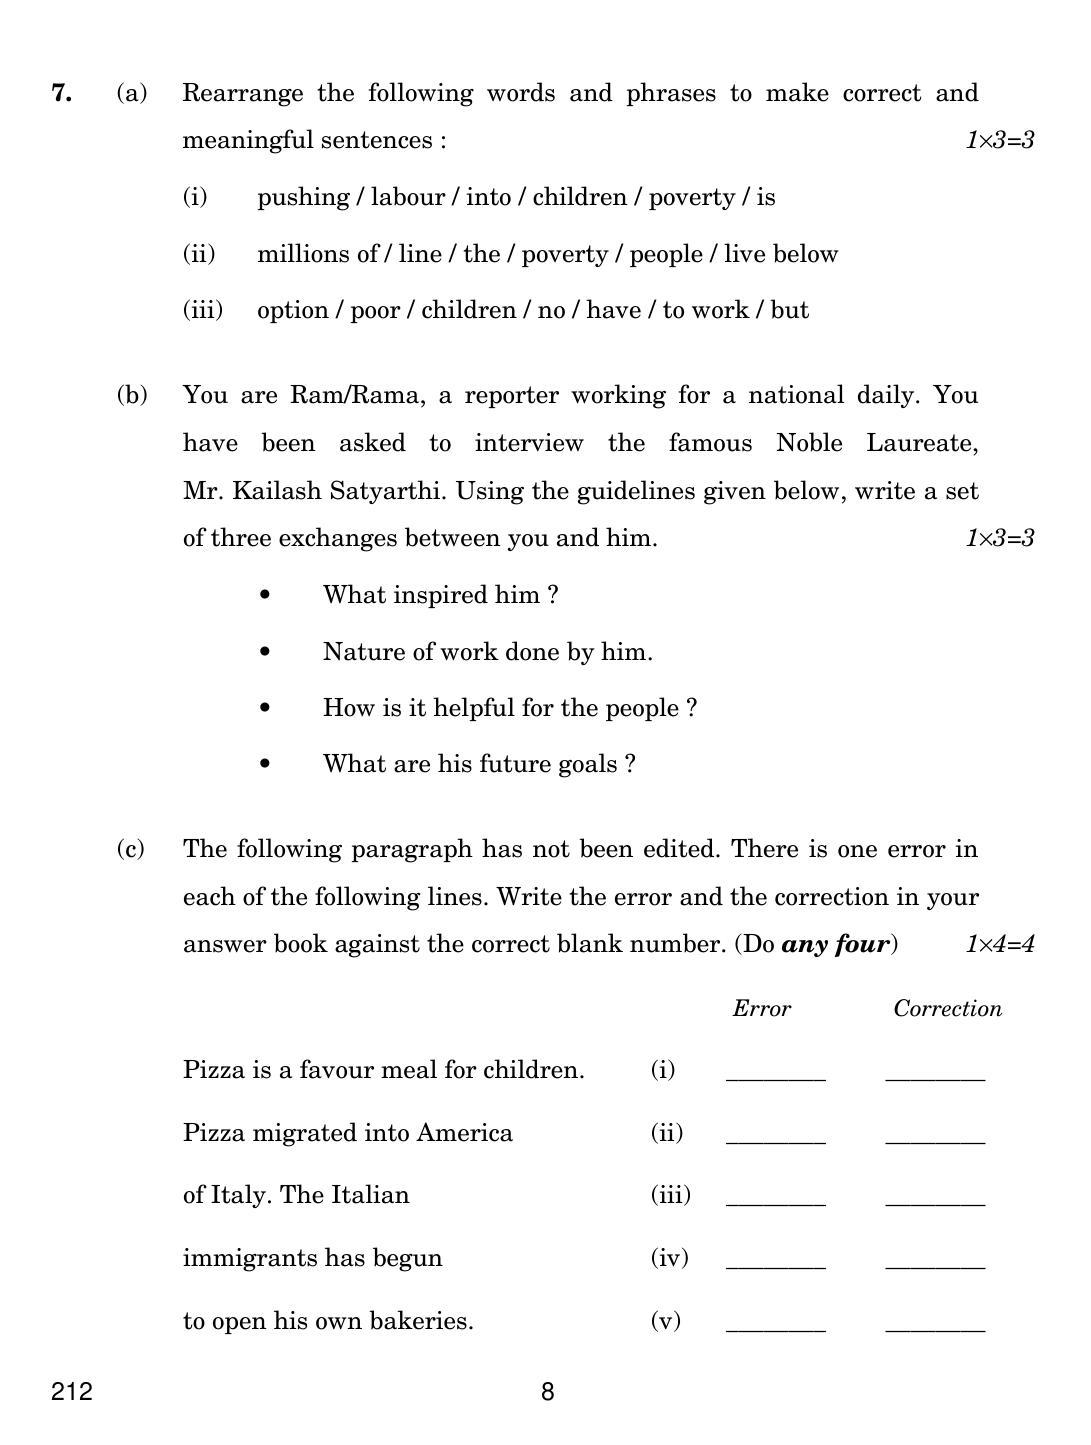 CBSE Class 12 212 ENGLISH ELECTIVE - C 2019 Compartment Question Paper - Page 8